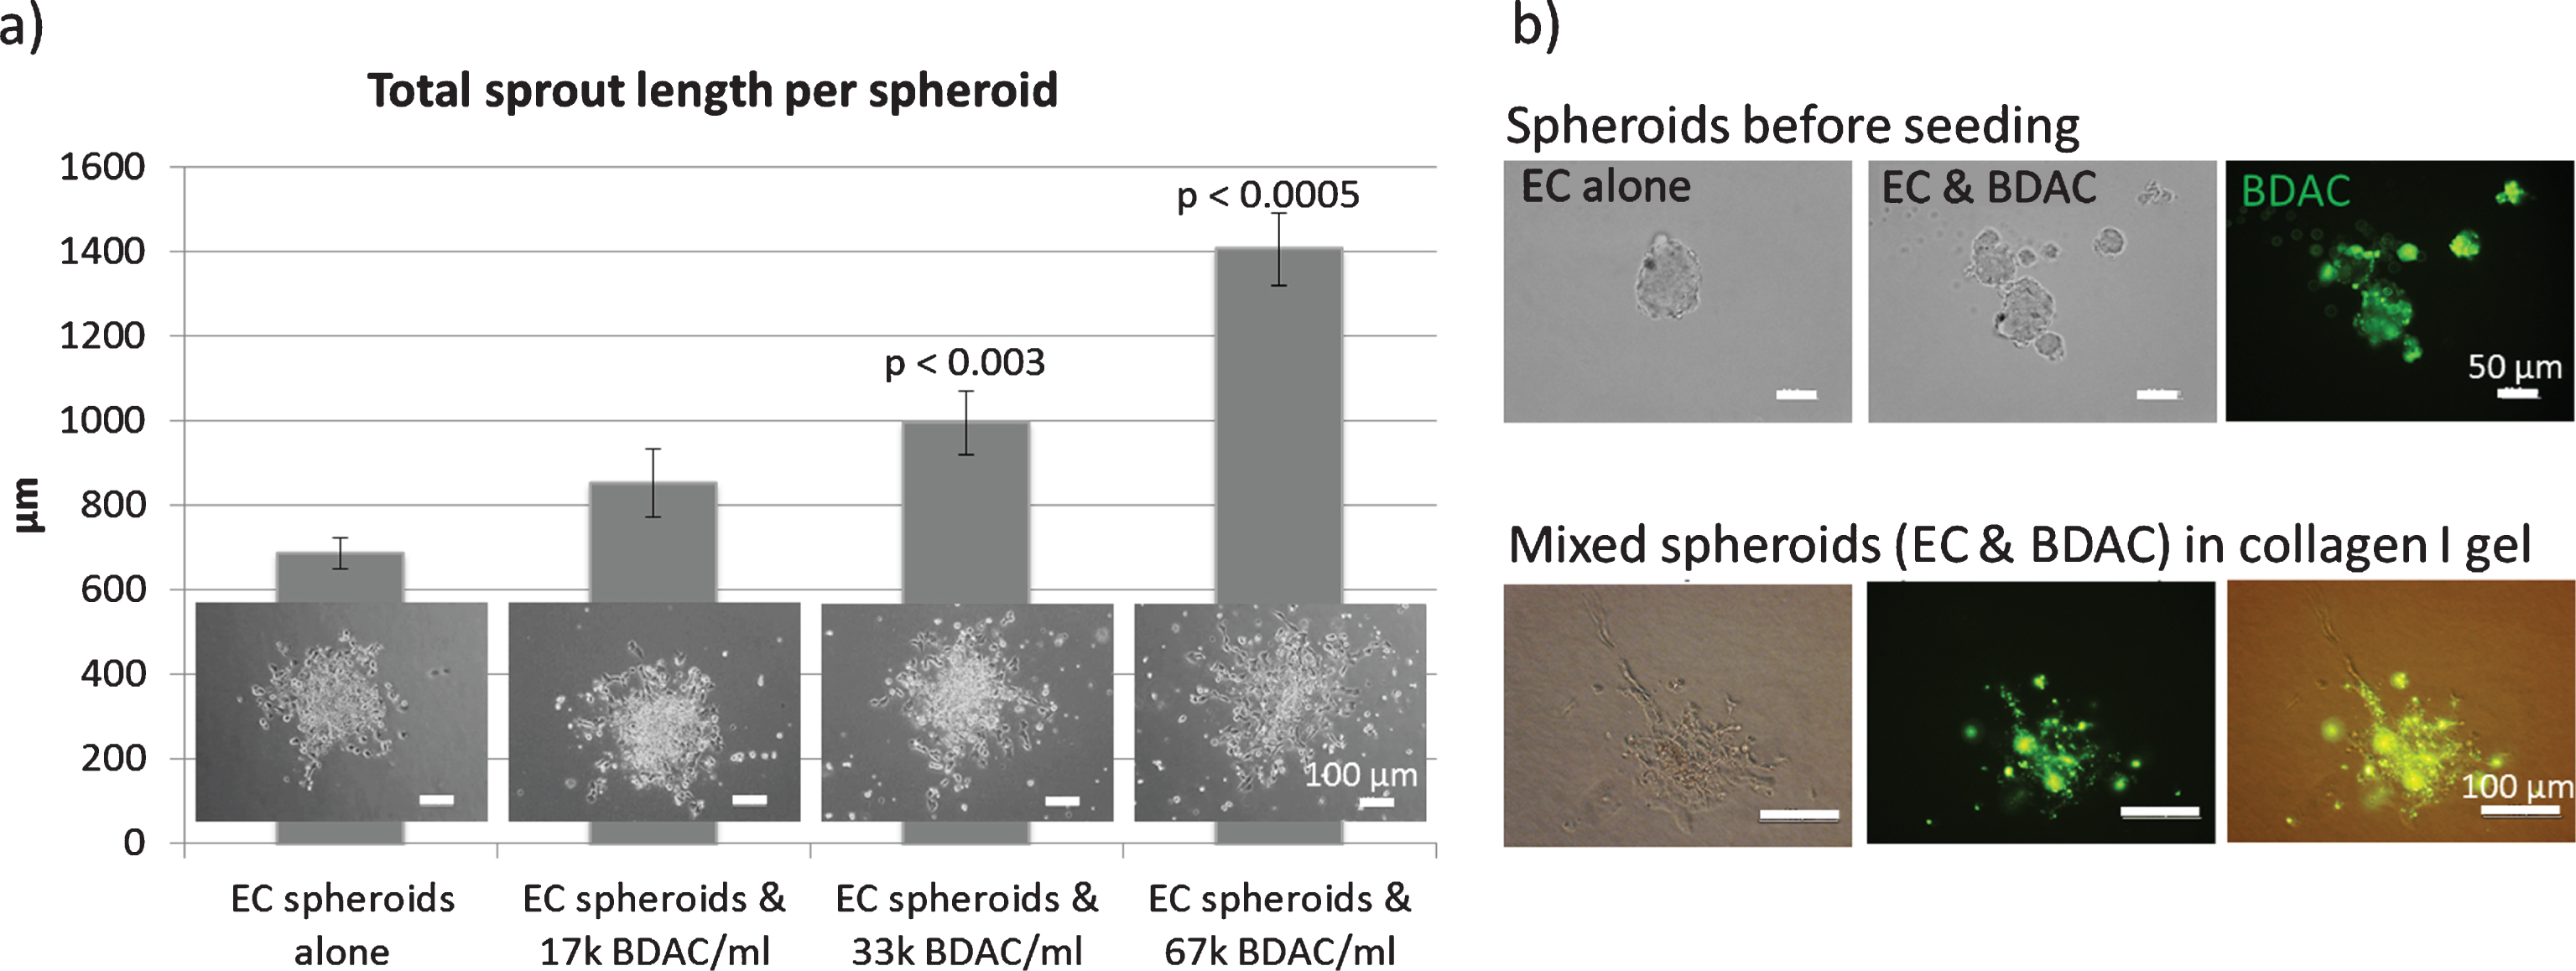 Spheroid sprouting assay: Endothelial cells were embedded in a collagen I gel and allowed to sprout. a) Mixed spheroids containing EC and BDAC (green staining) were embedded in a collagen I gel and allowed to sprout. b) BDACs were added as a single cell suspension directly into the gel.